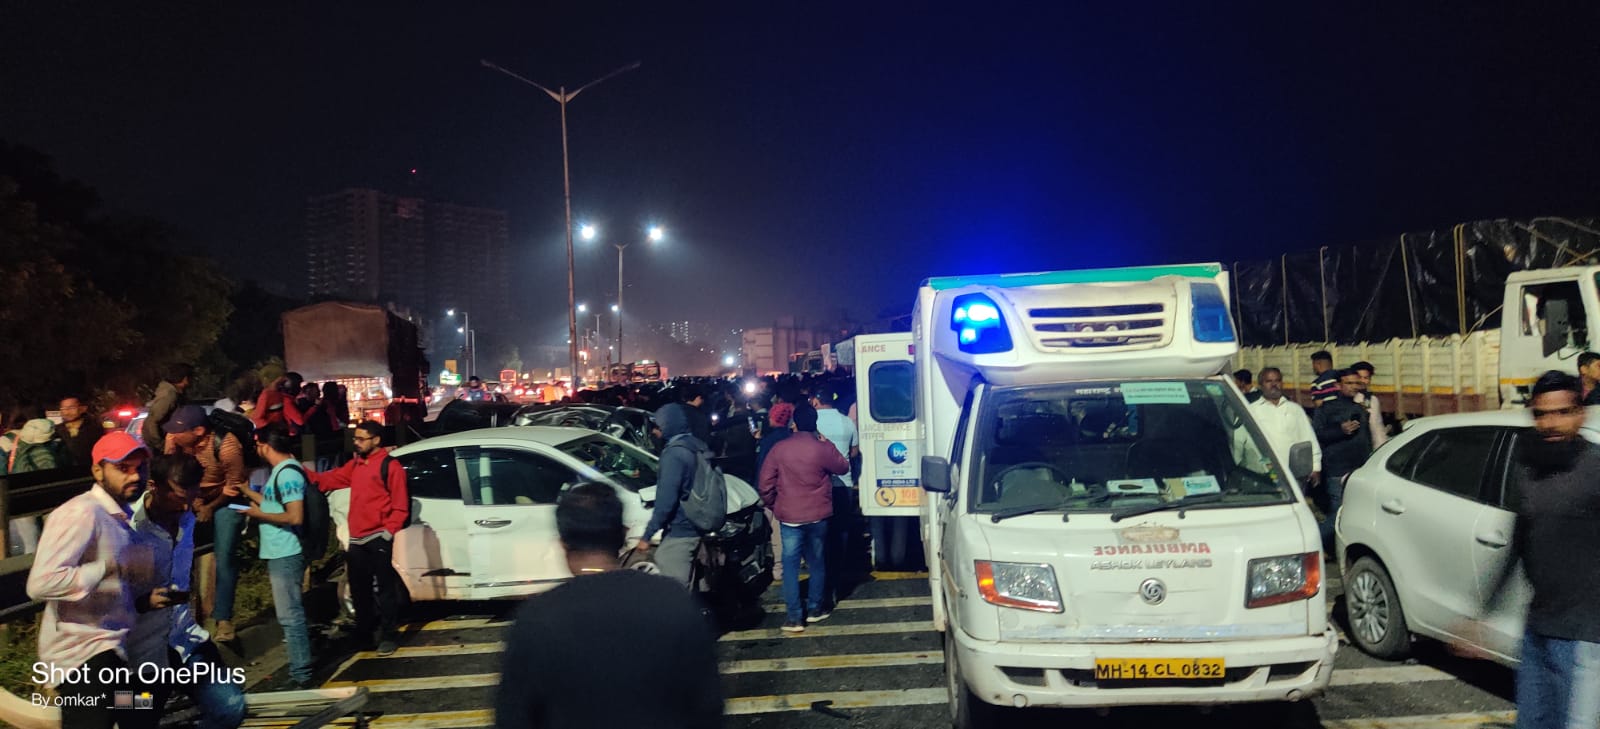 Vehicles Collided Head On Navle Bridge in Pune, 48 vehicles accident in pune